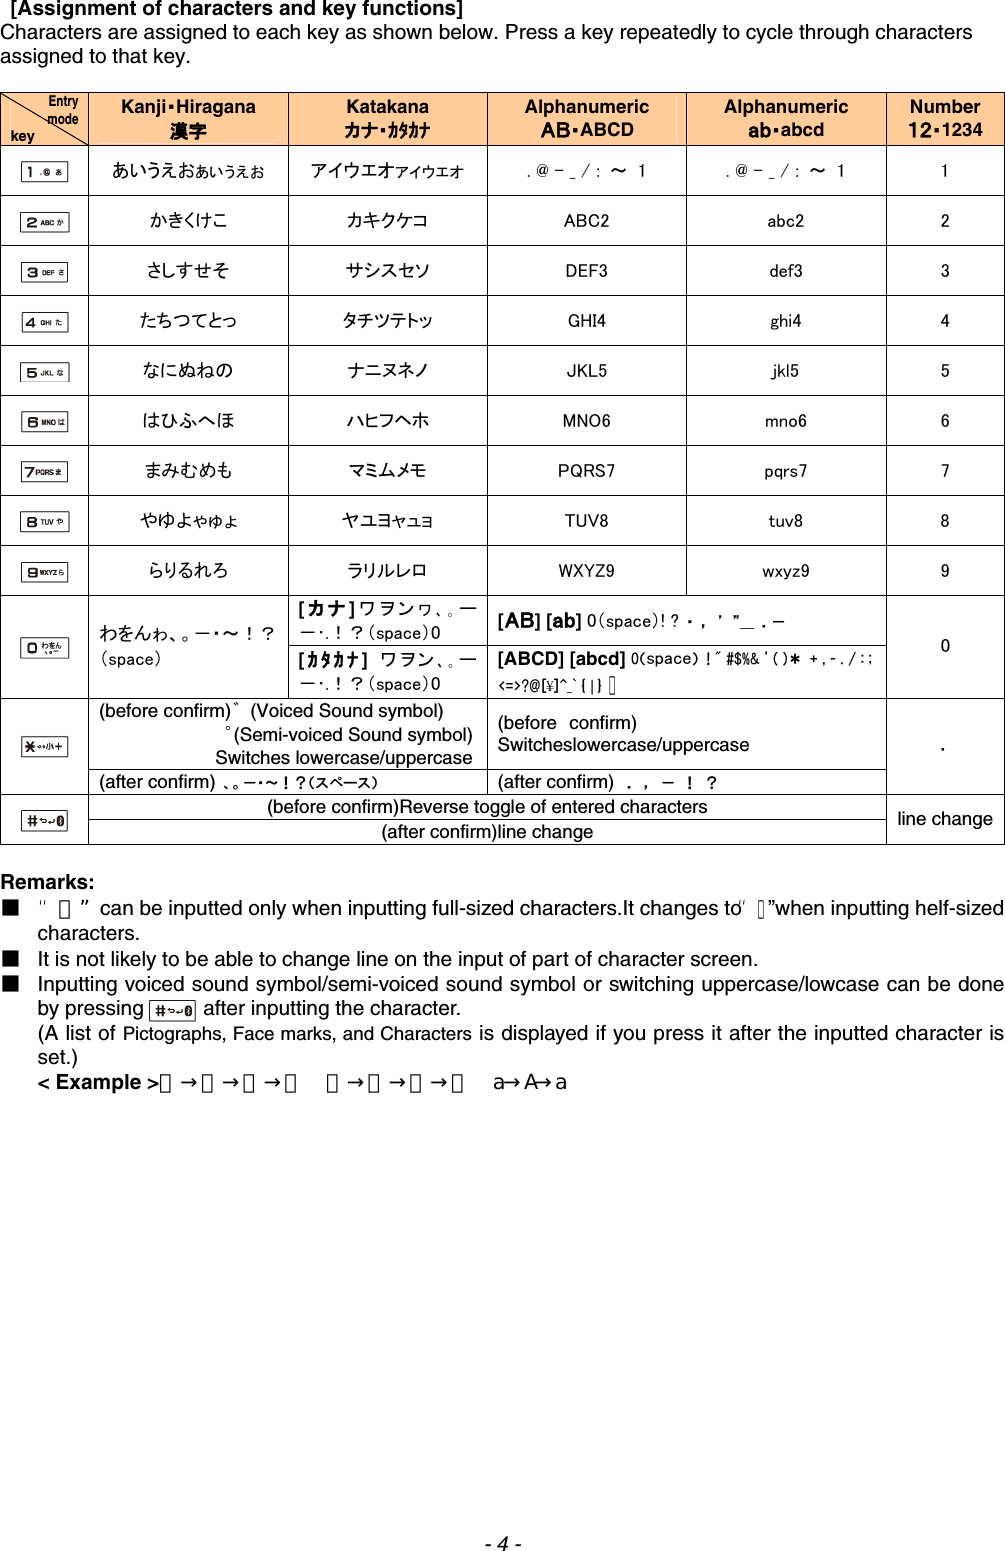 - 4 -   [Assignment of characters and key functions] Characters are assigned to each key as shown below. Press a key repeatedly to cycle through characters assigned to that key.  Entry mode key Kanji・Hiragana 漢字 Katakana カナ・ｶﾀｶﾅ Alphanumeric ＡＢ・ABCD Alphanumeric ａｂ・abcd Number １２・1234  あいうえおぁぃぅぇぉ  アイウエオァィゥェォ  . @ - _ / :  ～  1  . @ - _ / :  ～  1  1  かきくけこ  カキクケコ  ABC2  abc2  2  さしすせそ  サシスセソ  DEF3  def3  3  たちつてとっ  タチツテトッ  GHI4  ghi4  4  なにぬねの  ナニヌネノ  JKL5  jkl5  5  はひふへほ  ハヒフヘホ  MNO6  mno6  6  まみむめも  マミムメモ  PQRS7  pqrs7  7  やゆよゃゅょ  ヤユヨャュョ  TUV8  tuv8  8  らりるれろ  ラリルレロ  WXYZ9  wxyz9  9 [カナ]ワヲンヮ､｡ー－･.！？（space）0  [ＡＢ] [ａｂ] 0（space）! ? ・ ， ’ ”＿ ．－  わをんゎ、。－・～！？（space）  [ｶﾀｶﾅ]  ワヲン､｡ー－･.！？（space）0 [ABCD] [abcd] 0（space）  ! &quot; #$%&amp; &apos; ( )＊ + , - . / : ; &lt;=&gt;?@[¥]^_` { | } ∼ 0 (before confirm)゛  (Voiced Sound symbol)           ゜(Semi-voiced Sound symbol)         Switches lowercase/uppercase(before confirm) Switcheslowercase/uppercase  (after confirm)  、。－・～！？（スペース） (after confirm) ．  ，  －  ！  ？ ． (before confirm)Reverse toggle of entered characters  (after confirm)line change    line change Remarks: ■ “∼”can be inputted only when inputting full-sized characters.It changes to“∼”when inputting helf-sized characters.  ■ It is not likely to be able to change line on the input of part of character screen. ■ Inputting voiced sound symbol/semi-voiced sound symbol or switching uppercase/lowcase can be done by pressing  after inputting the character. (A list of Pictographs, Face marks, and Characters is displayed if you press it after the inputted character is set.) &lt; Example &gt;つ→っ→づ→つ  ハ→バ→パ→ハ  a→A→a    